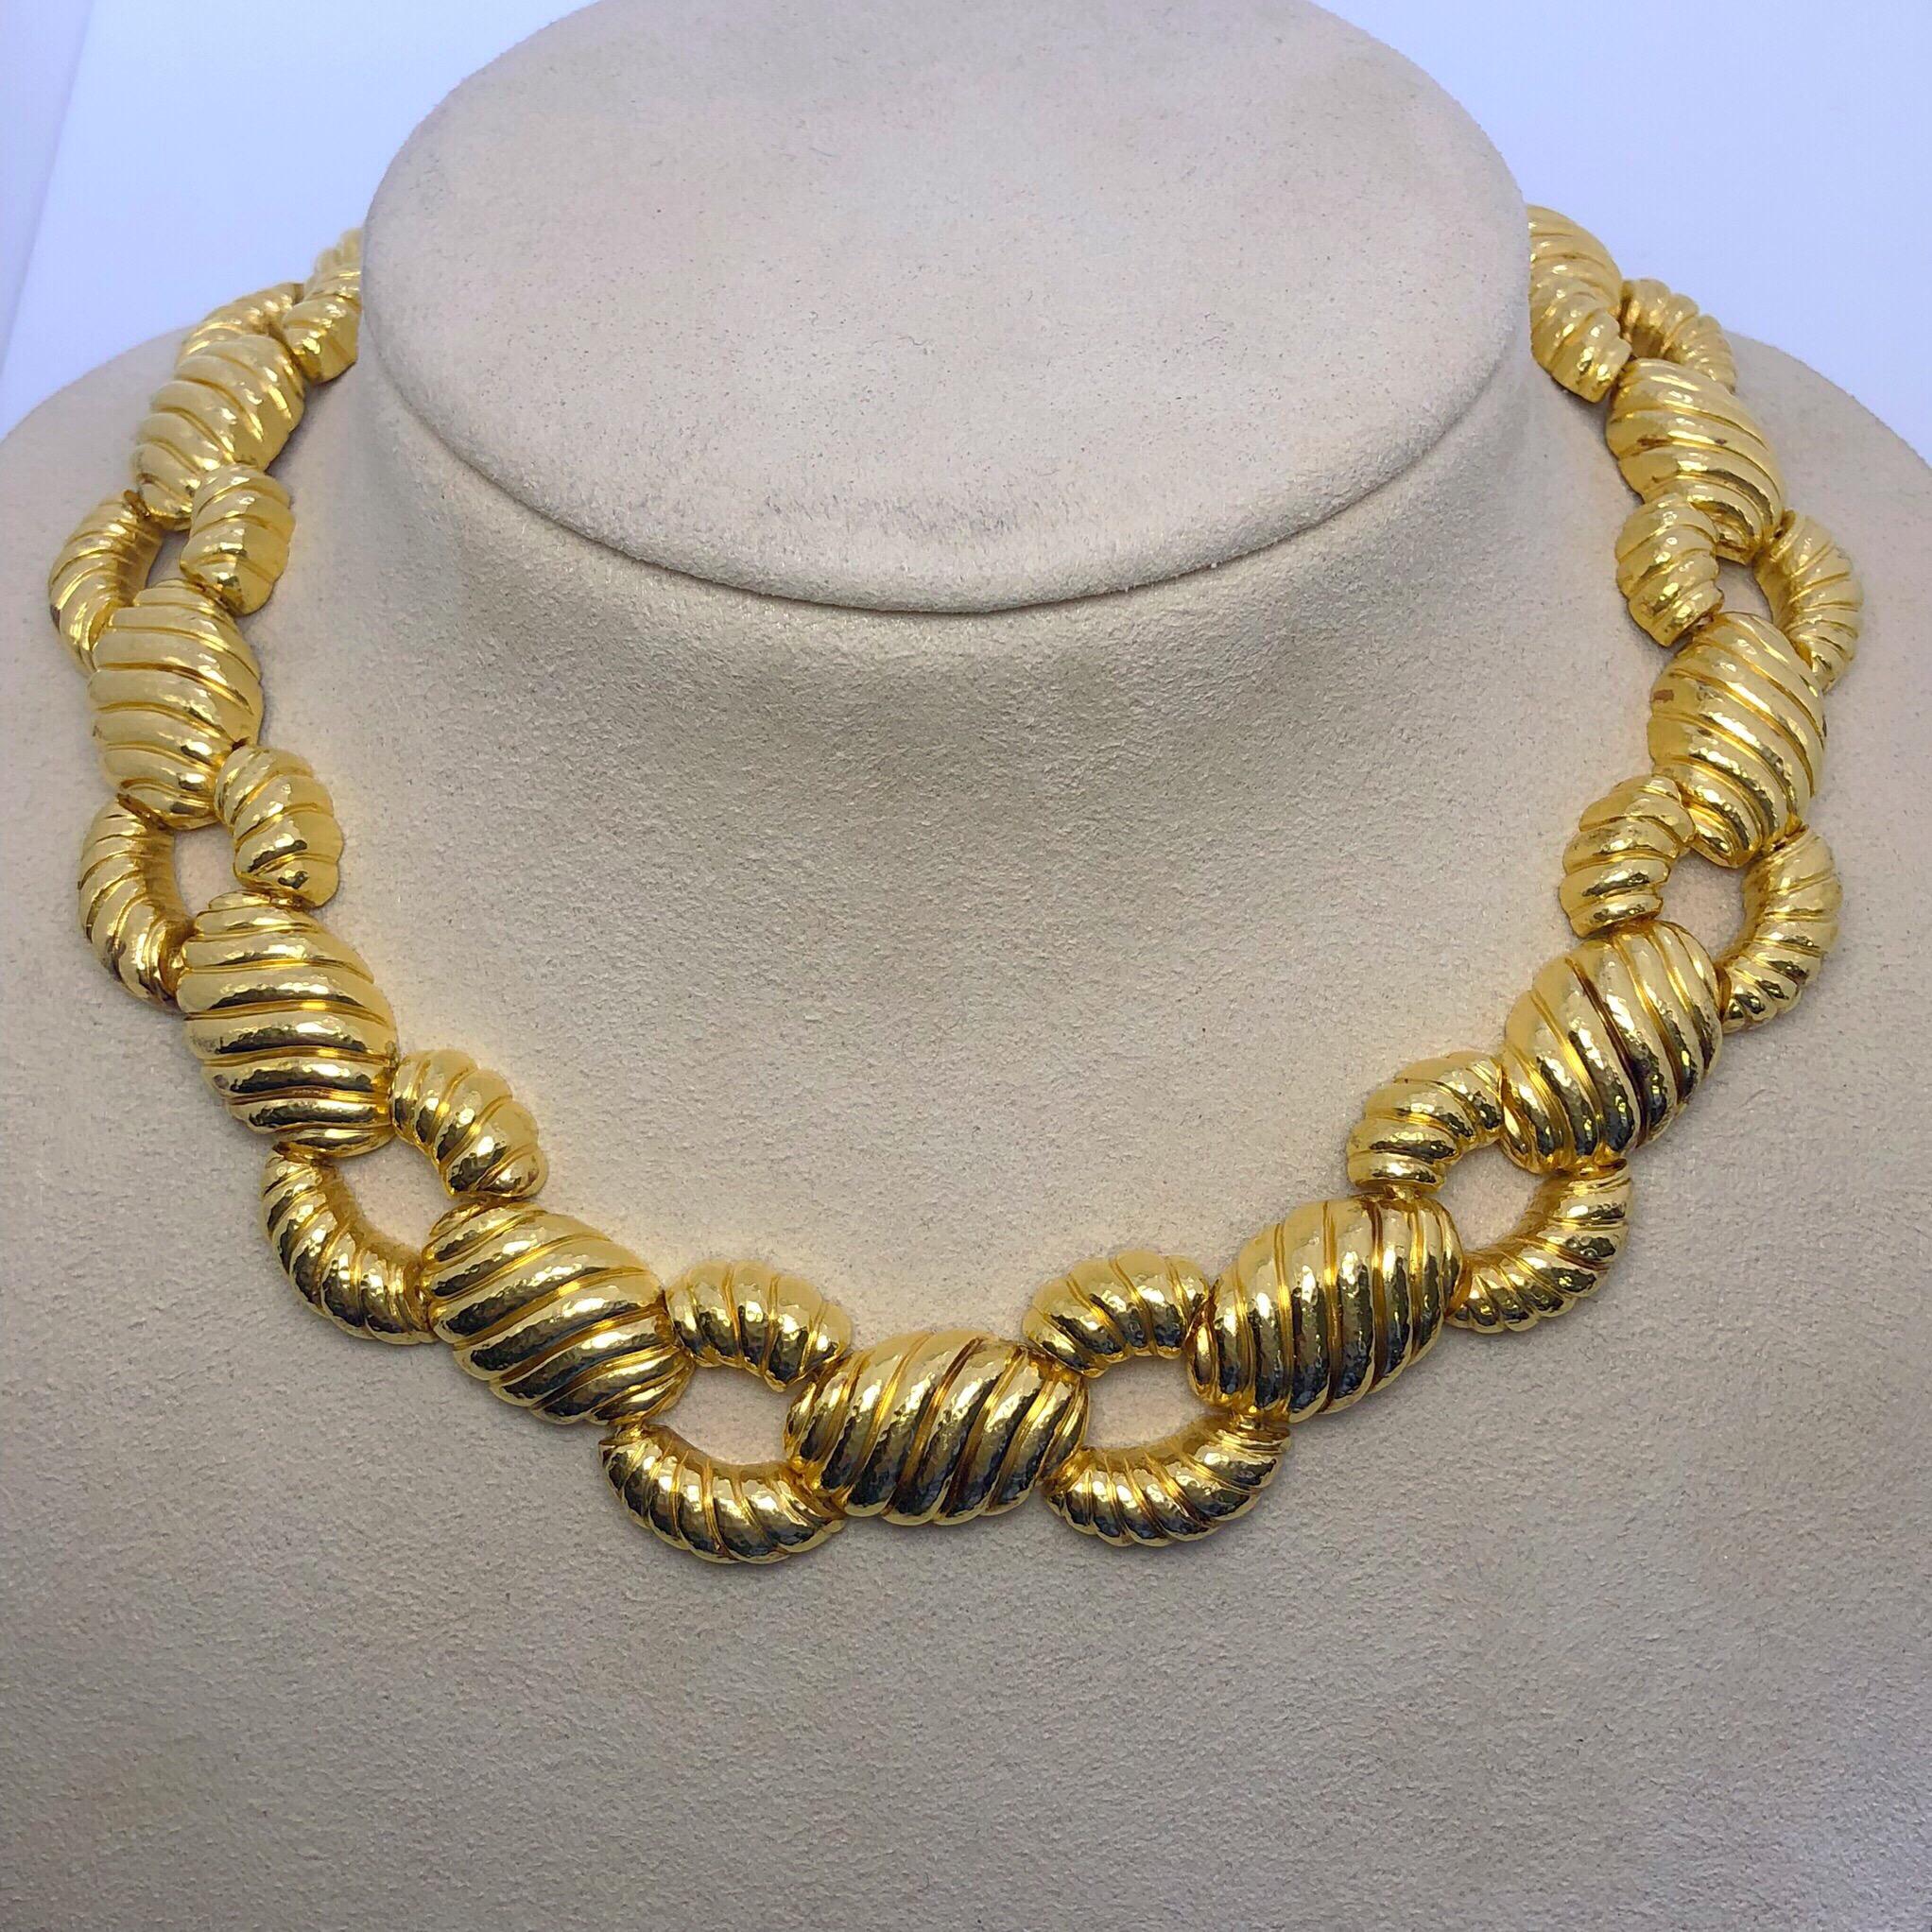 This beautiful necklace is designed by Zolotas of Athens, Greece. Founded in 1895 the company merges Greek heritage with modern style to create these timeless pieces which have since been Coveted by both Royals and Actresses.
Composed of 22 karat